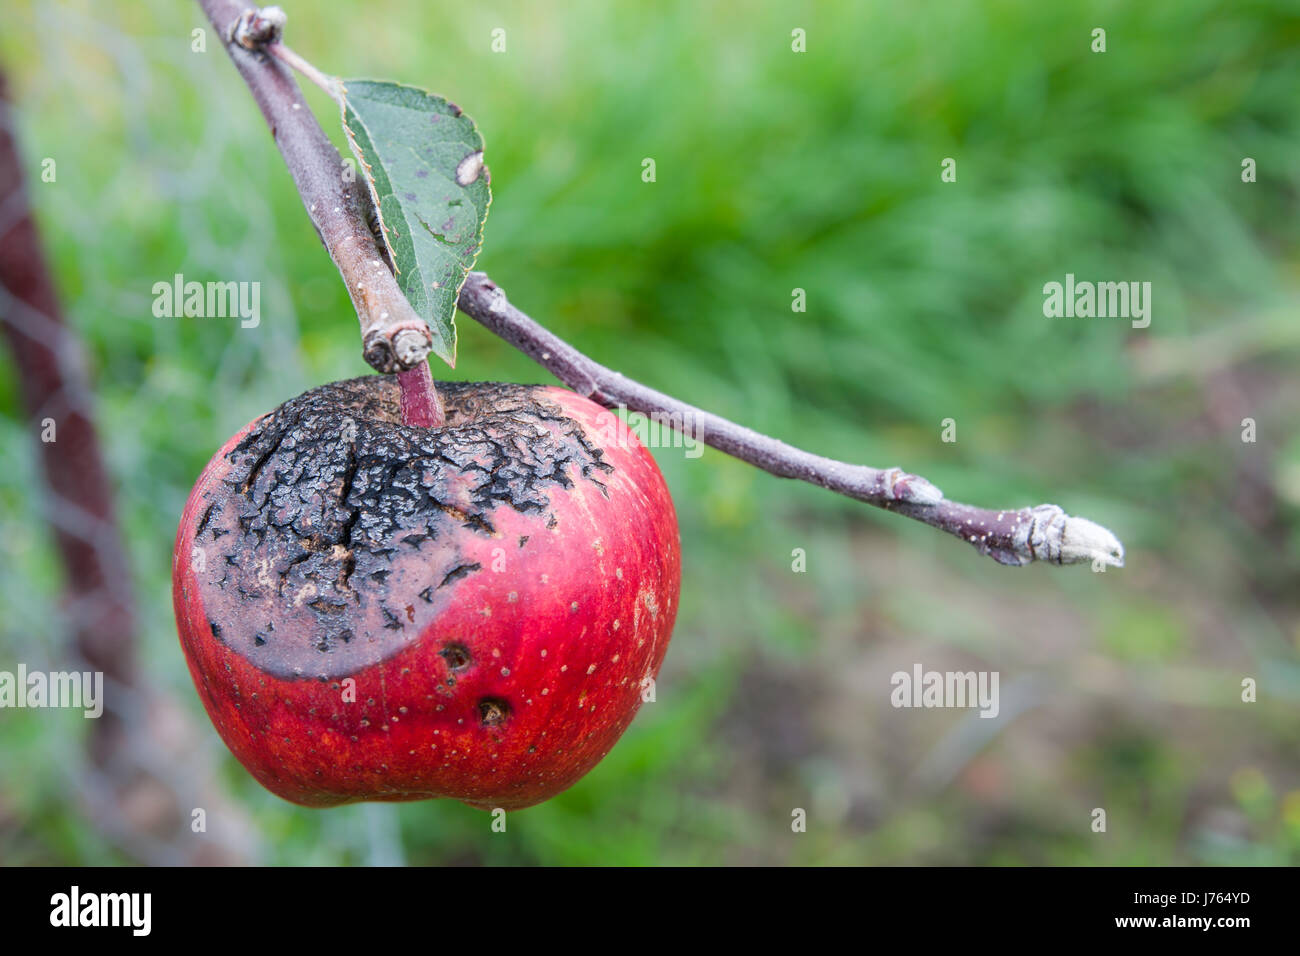 apples apple crack disease rot infection scab fissure illness sickness leaf Stock Photo